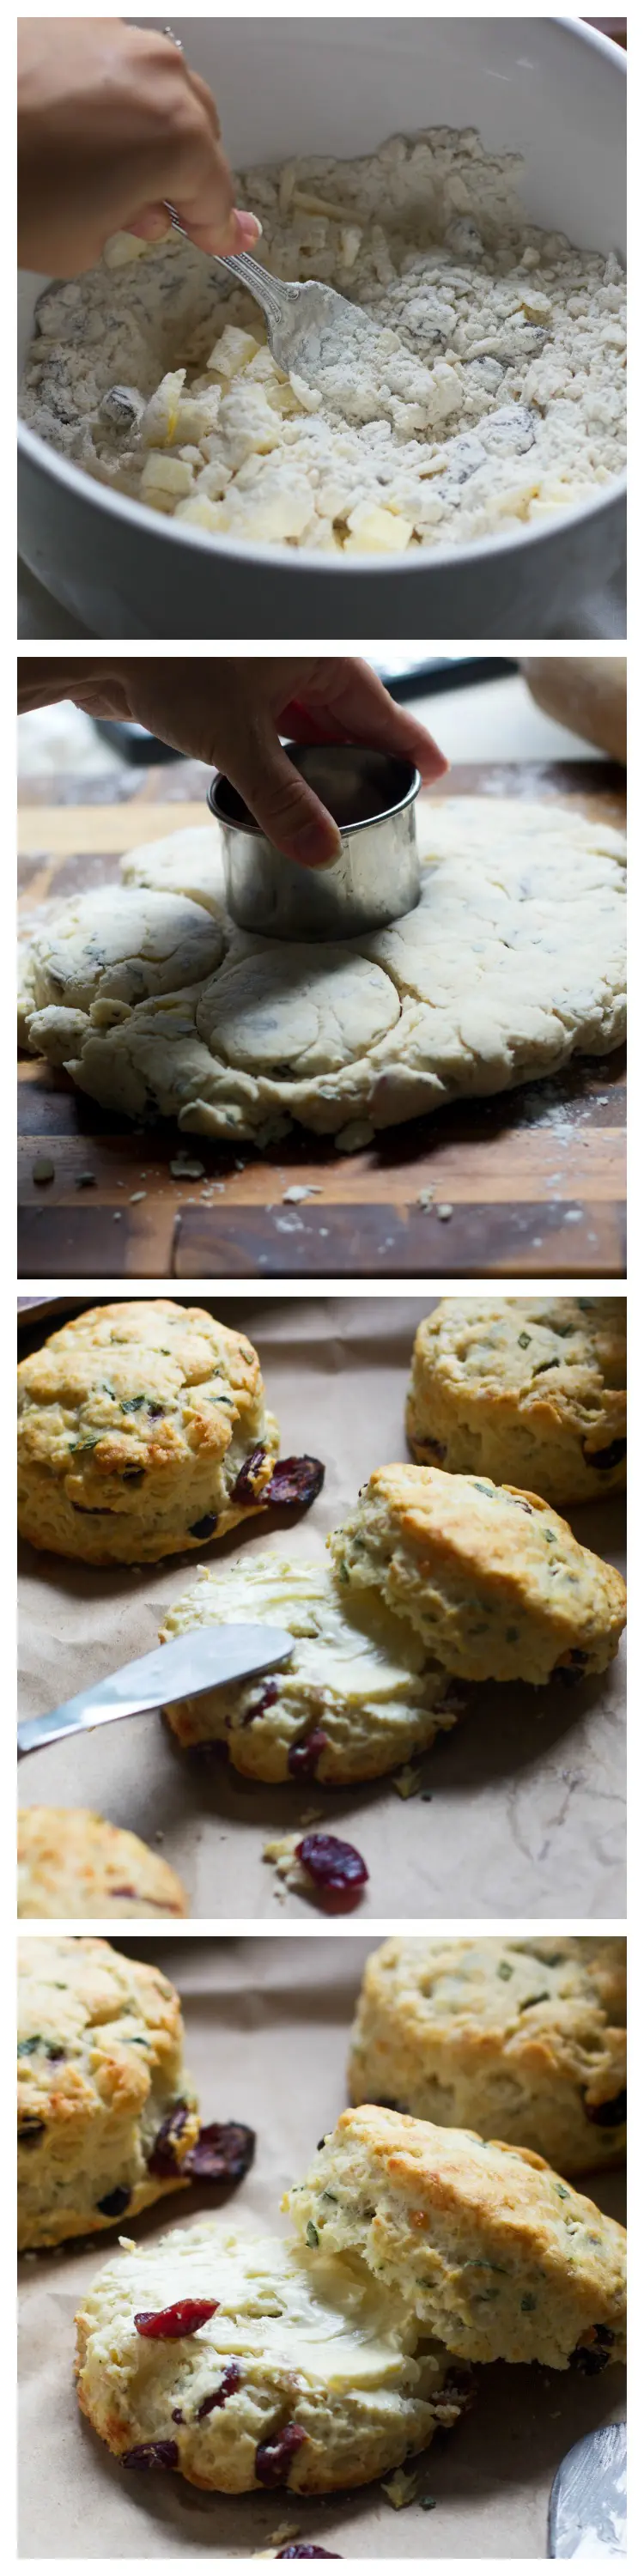 Super Easy Gruyere, Cranberry and Sage Buttermilk Biscuits - The perfect alternative to rolls on your holiday table! #inspiredgathering #spon